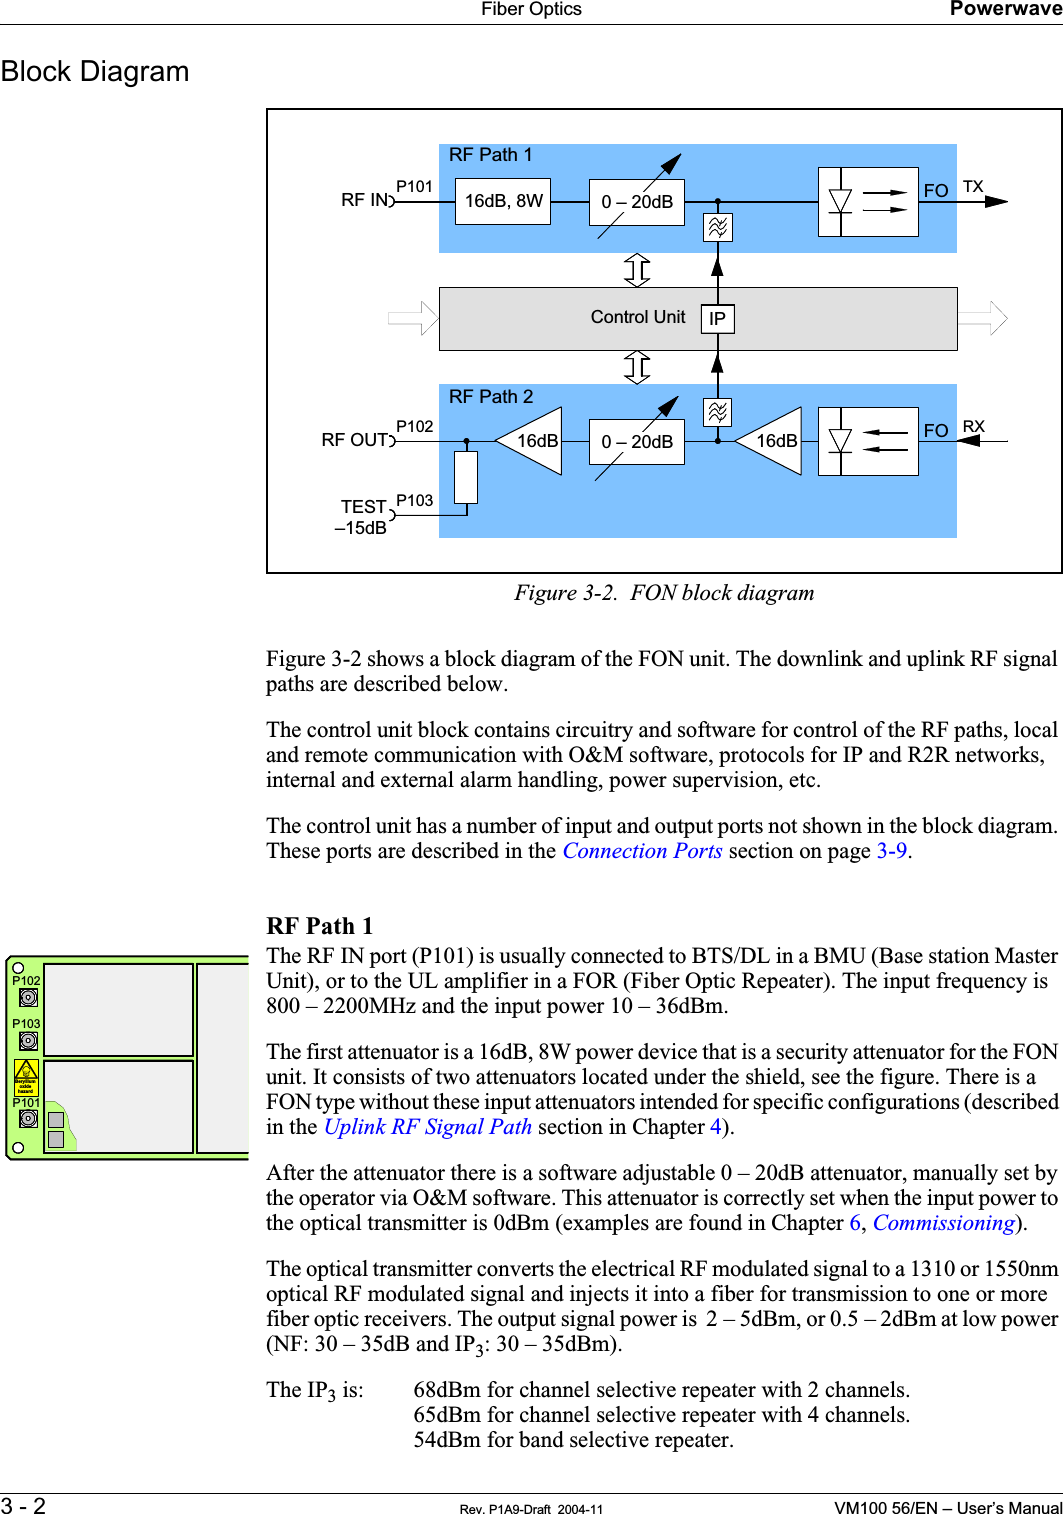 Fiber Optics Powerwave3 - 2 Rev. P1A9-Draft  2004-11 VM100 56/EN – User’s ManualBlock DiagramFigure 3-2.  FON block diagramFigure 3-2 shows a block diagram of the FON unit. The downlink and uplink RF signal paths are described below.The control unit block contains circuitry and software for control of the RF paths, local and remote communication with O&amp;M software, protocols for IP and R2R networks, internal and external alarm handling, power supervision, etc.The control unit has a number of input and output ports not shown in the block diagram. These ports are described in the Connection Ports section on page 3-9.RF Path 1The RF IN port (P101) is usually connected to BTS/DL in a BMU (Base station Master Unit), or to the UL amplifier in a FOR (Fiber Optic Repeater). The input frequency is 800 – 2200MHz and the input power 10 – 36dBm.The first attenuator is a 16dB, 8W power device that is a security attenuator for the FON unit. It consists of two attenuators located under the shield, see the figure. There is a FON type without these input attenuators intended for specific configurations (described in the Uplink RF Signal Path section in Chapter 4).After the attenuator there is a software adjustable 0 – 20dB attenuator, manually set by the operator via O&amp;M software. This attenuator is correctly set when the input power to the optical transmitter is 0dBm (examples are found in Chapter 6,Commissioning).The optical transmitter converts the electrical RF modulated signal to a 1310 or 1550nm optical RF modulated signal and injects it into a fiber for transmission to one or more fiber optic receivers. The output signal power is  2 – 5dBm, or 0.5 – 2dBm at low power (NF: 30 – 35dB and IP3: 30 – 35dBm).The IP3 is: 68dBm for channel selective repeater with 2 channels.65dBm for channel selective repeater with 4 channels.54dBm for band selective repeater.16dB, 8W FORF IN TXP101FORF OUT RXP102Control UnitP103TEST–15dB0 – 20dB0 – 20dBIP16dB16dBRF Path 1RF Path 2P102Bery lliumoxidehazardP103P101